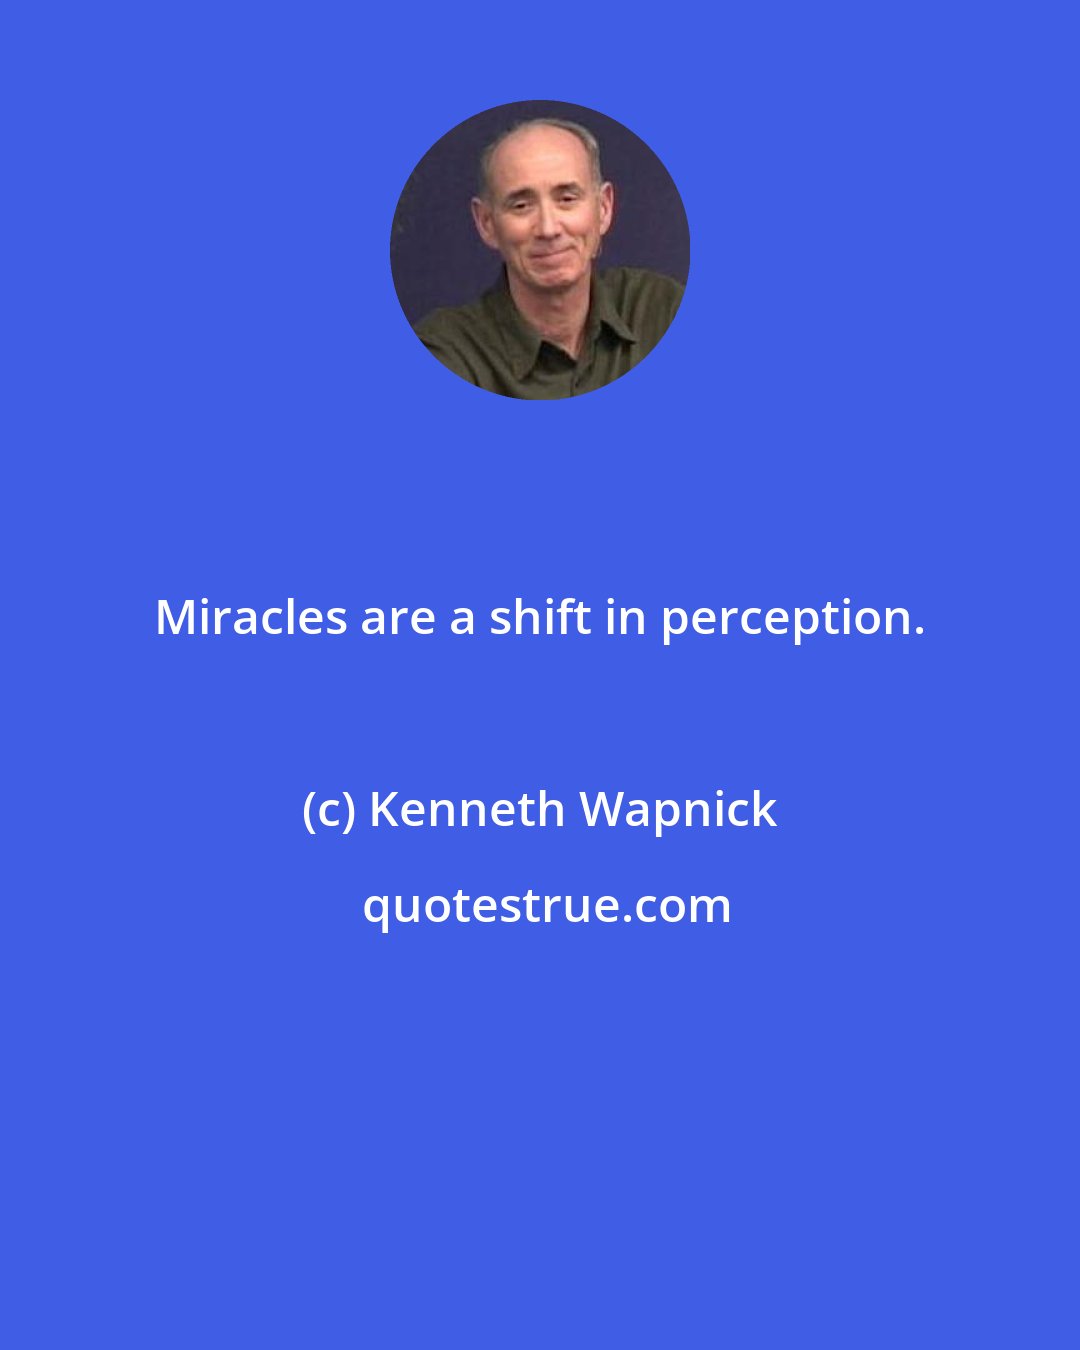 Kenneth Wapnick: Miracles are a shift in perception.